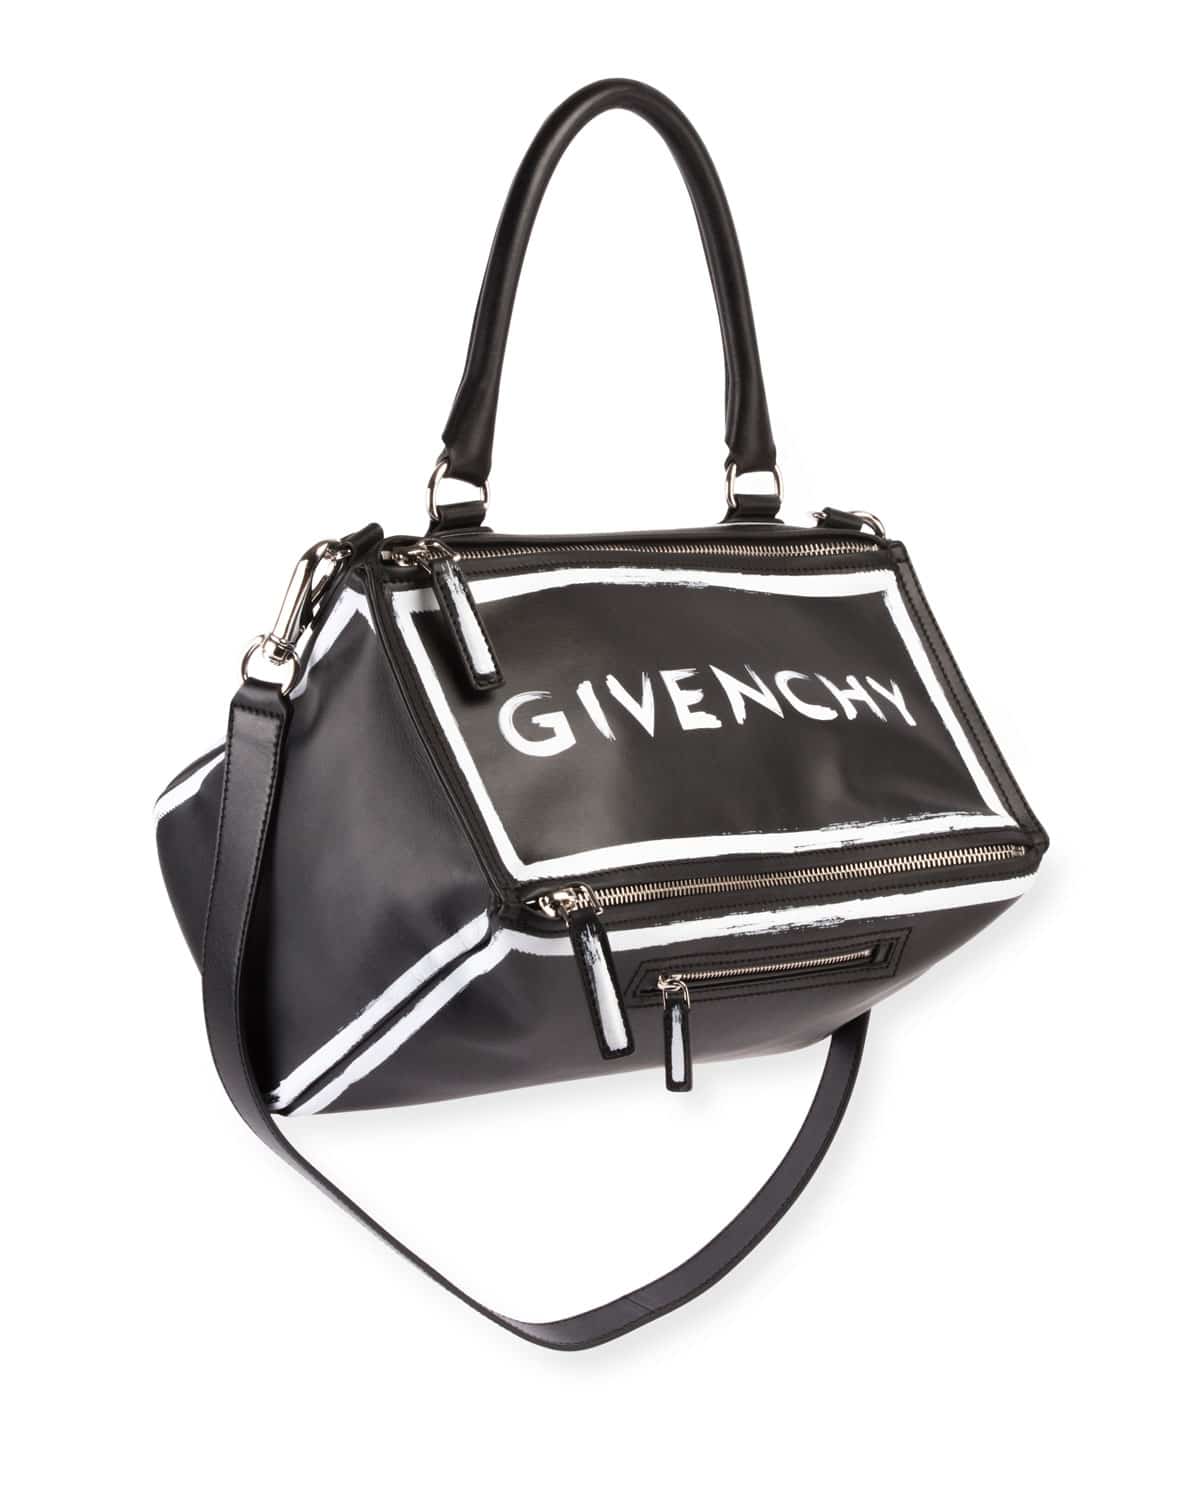 givenchy purse price